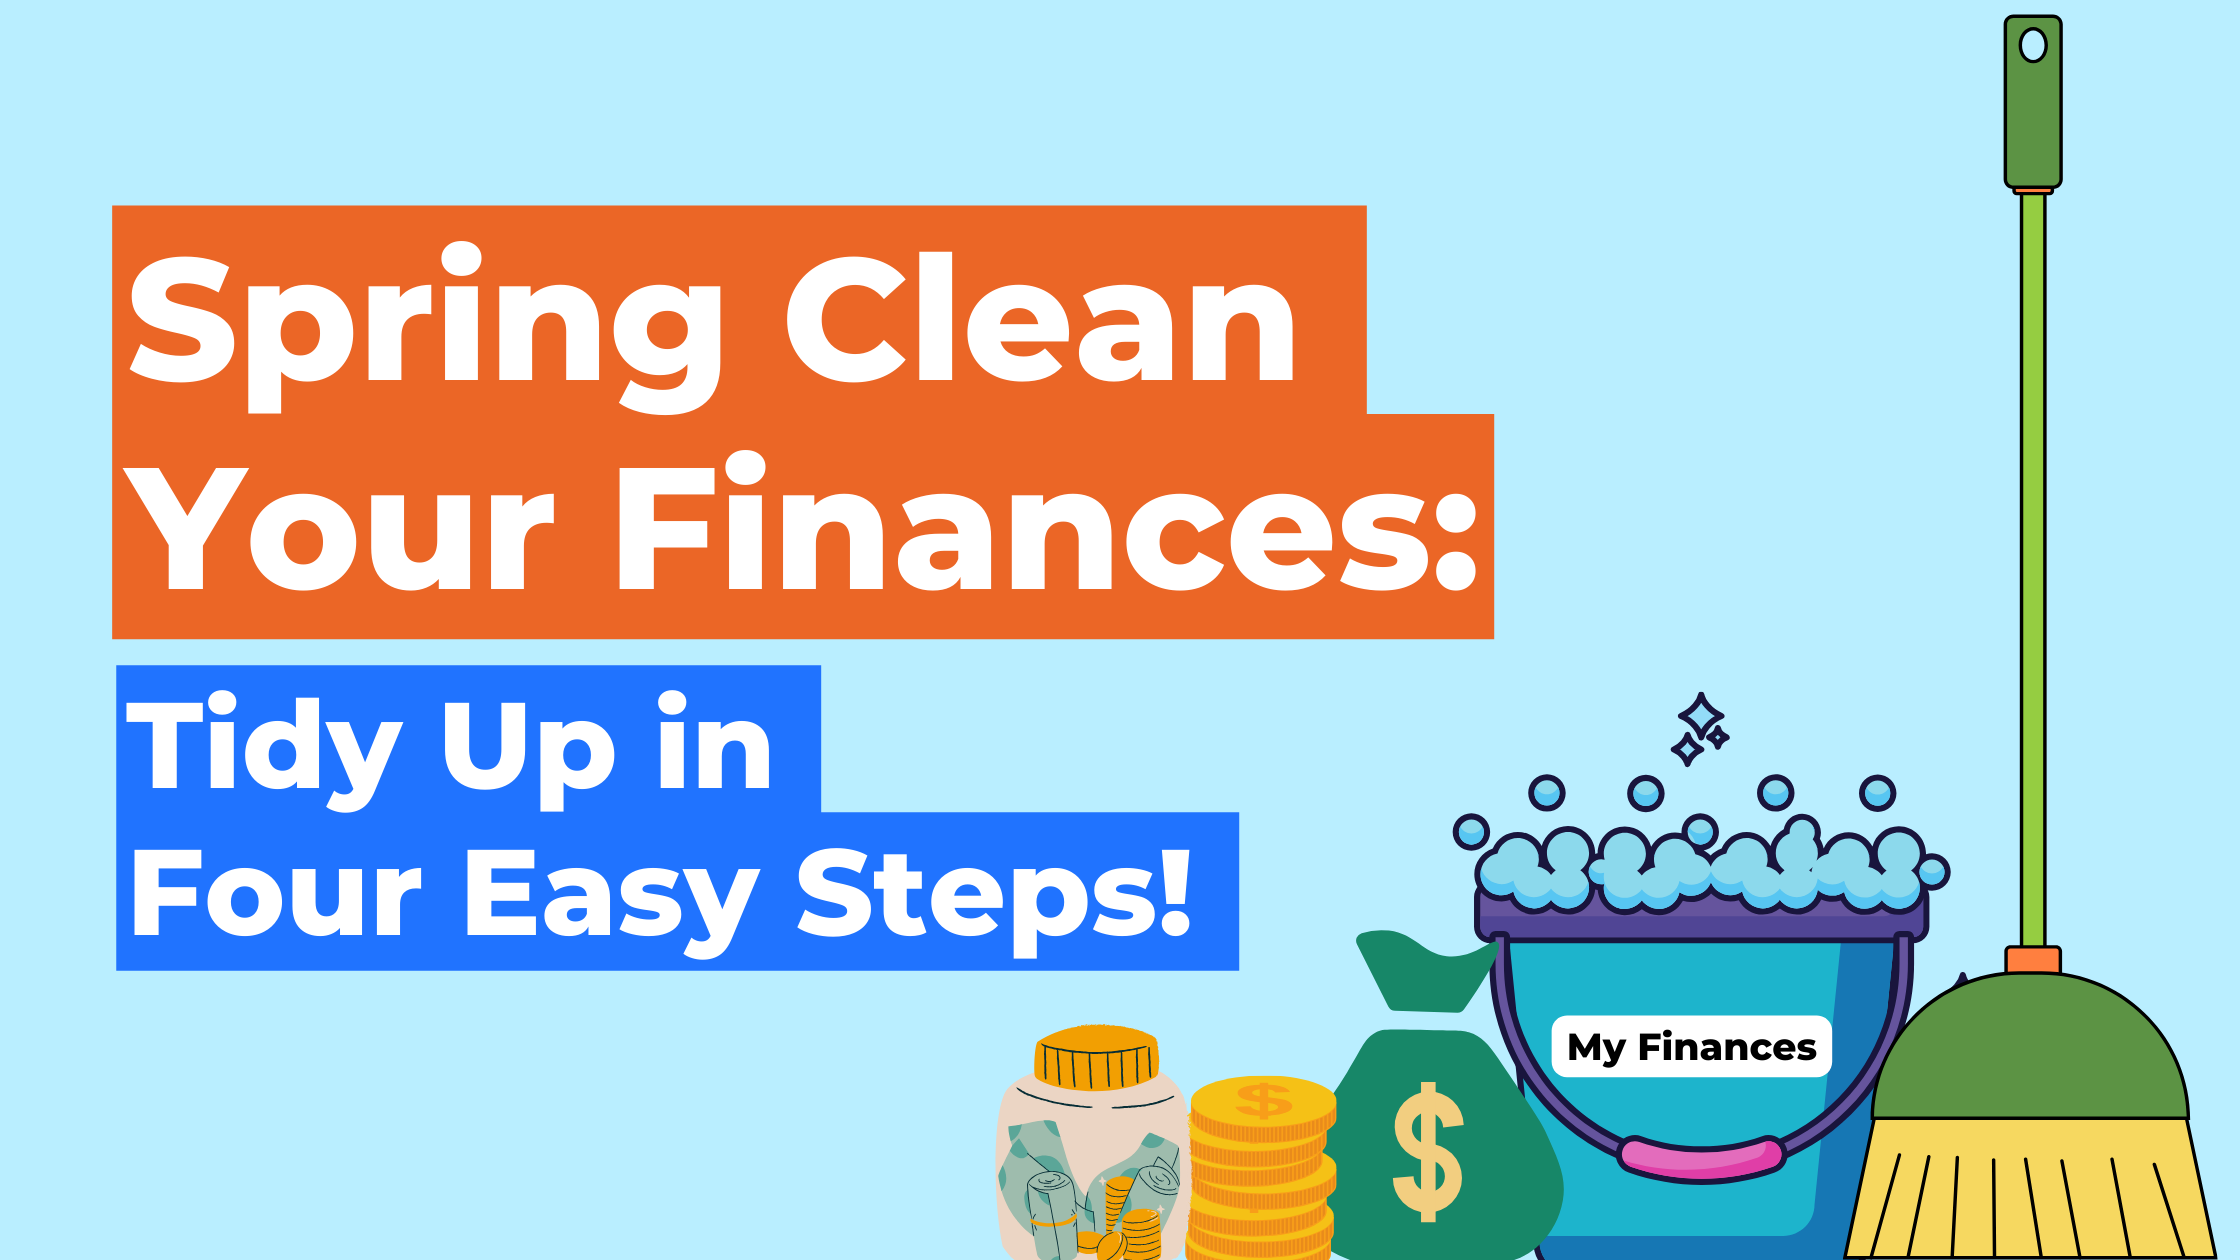 Spring Clean Your Finances: Tidy Up in Four Easy Steps